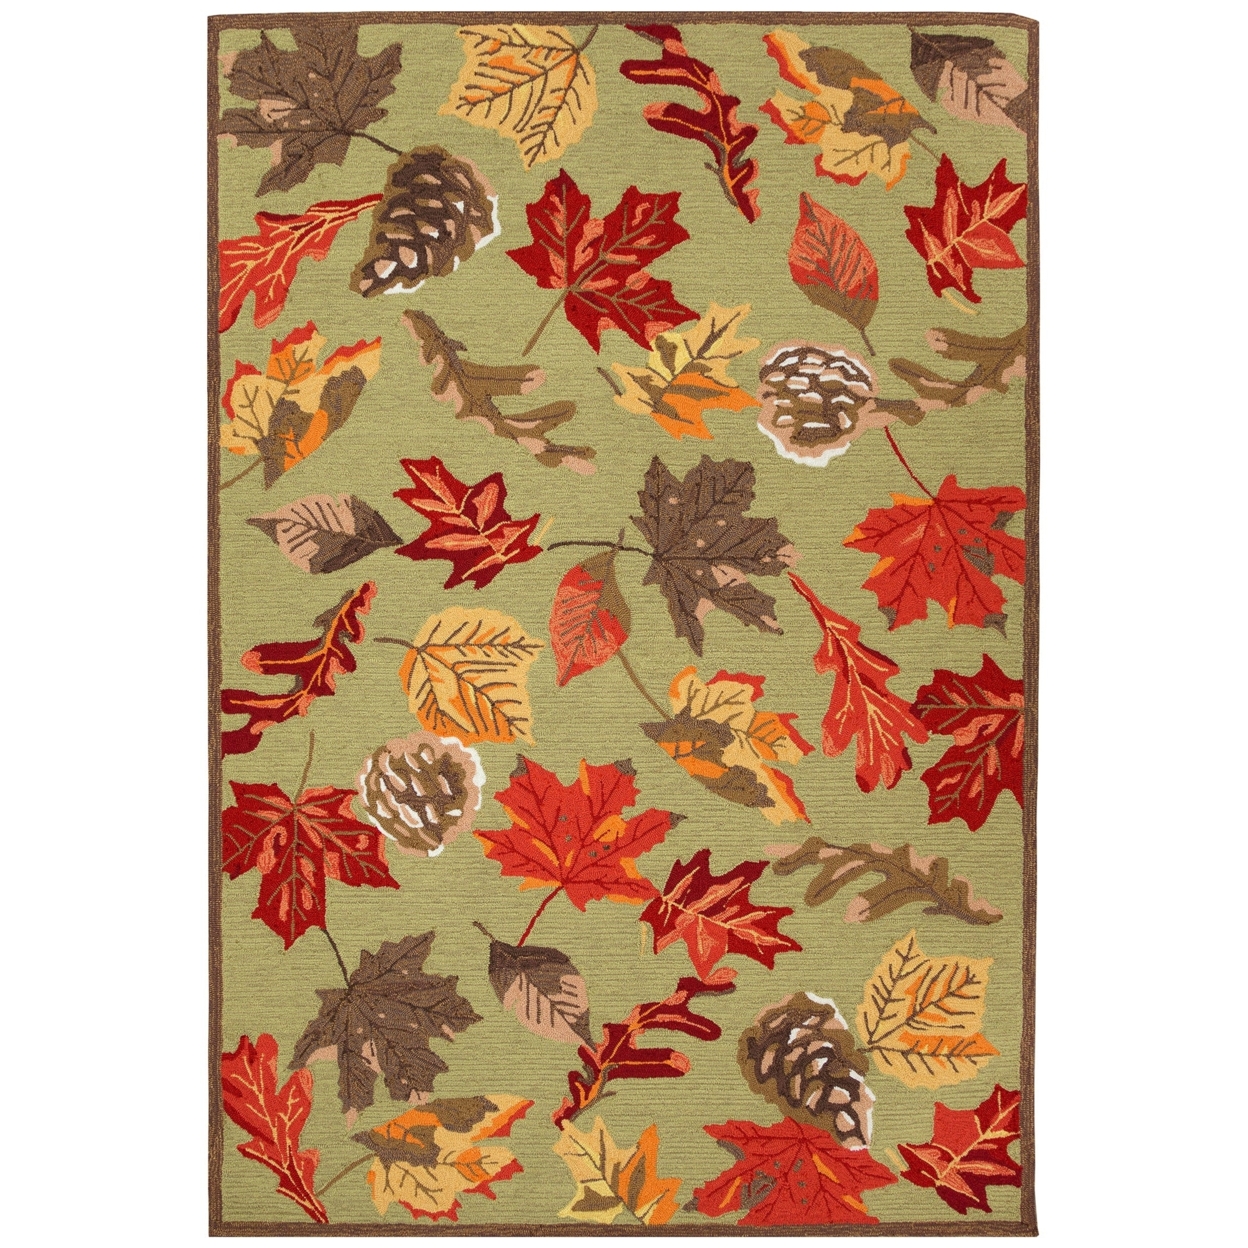 Liora Manne Ravella Falling Leaves Indoor Outdoor Area Rug Moss - 7'6 X 9'6